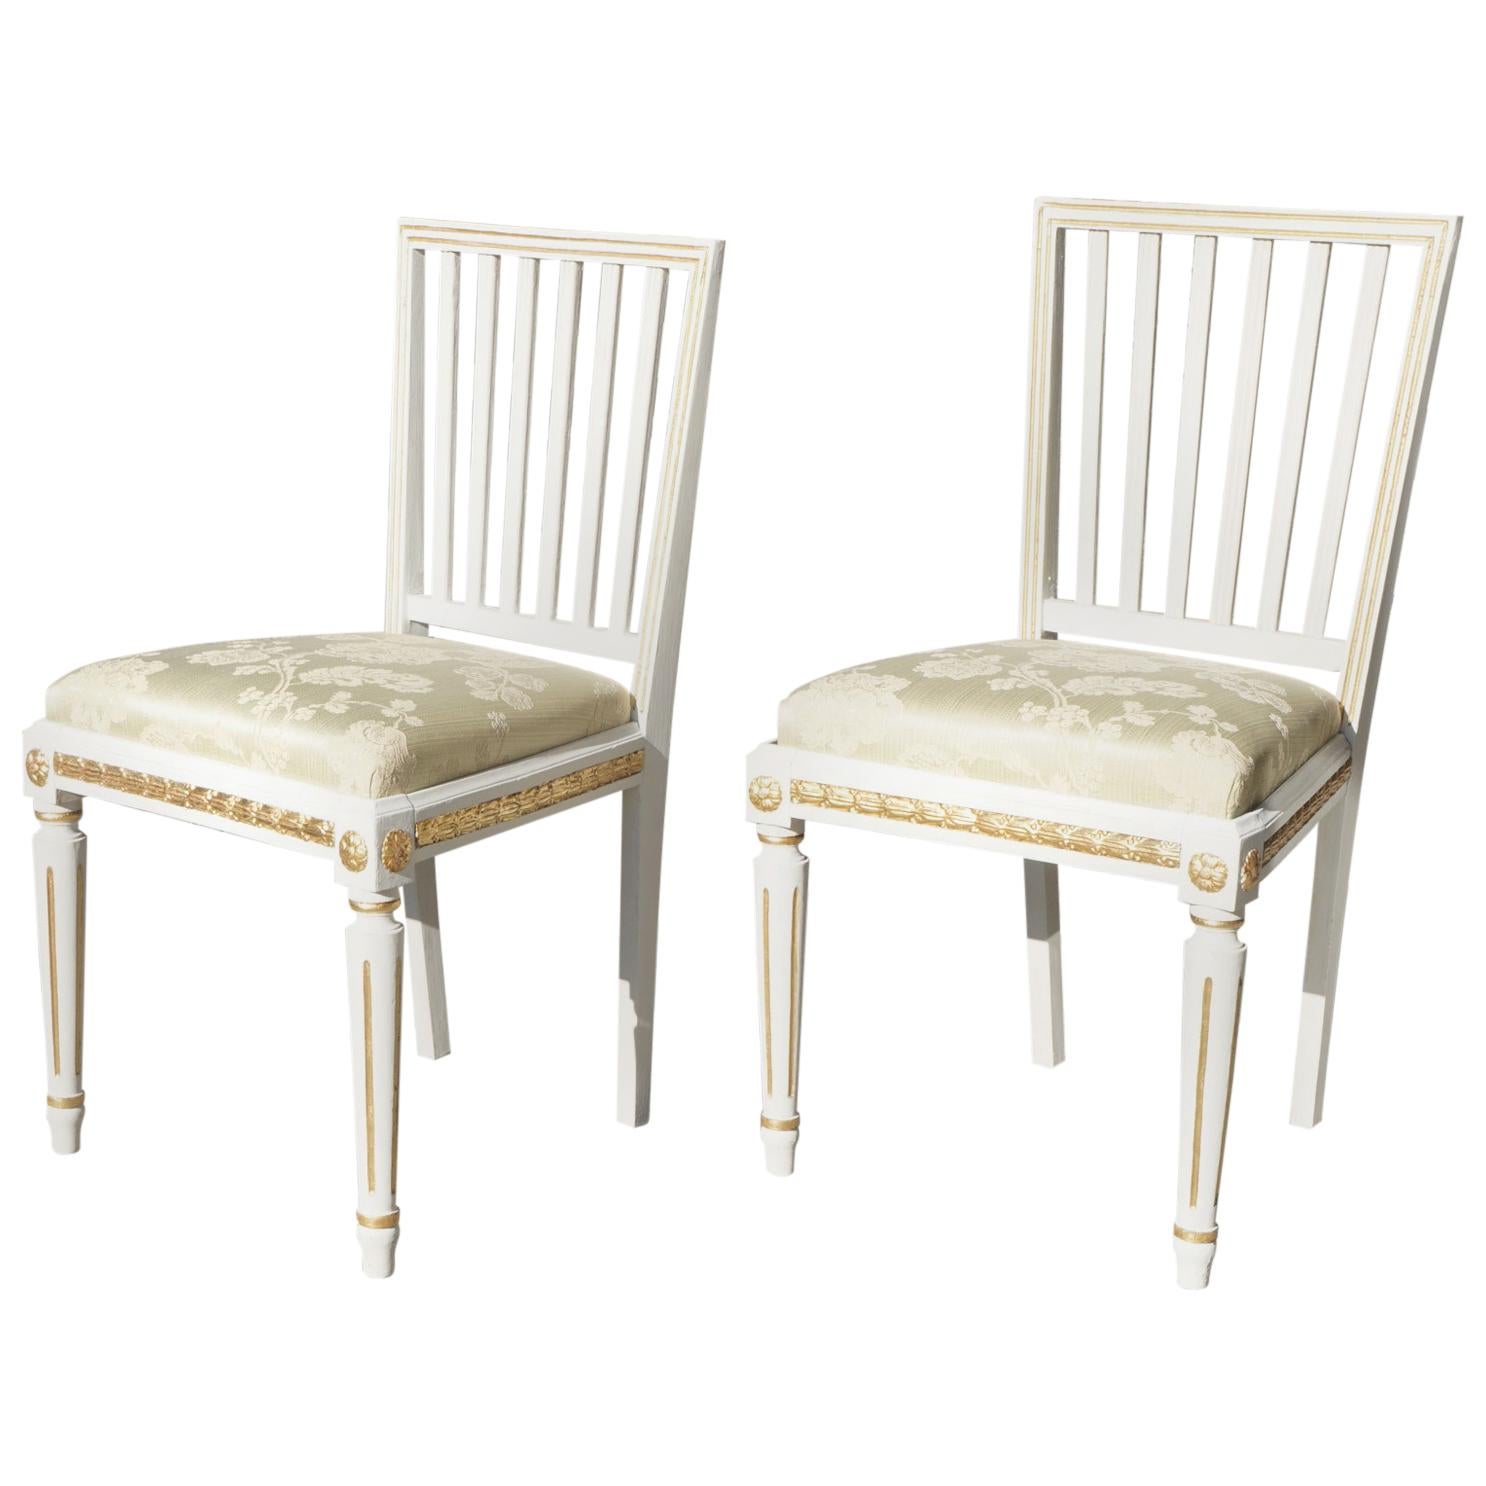 Pair of Gustavian 18th Century Swedish Painted and Gilded Side Chairs For Sale